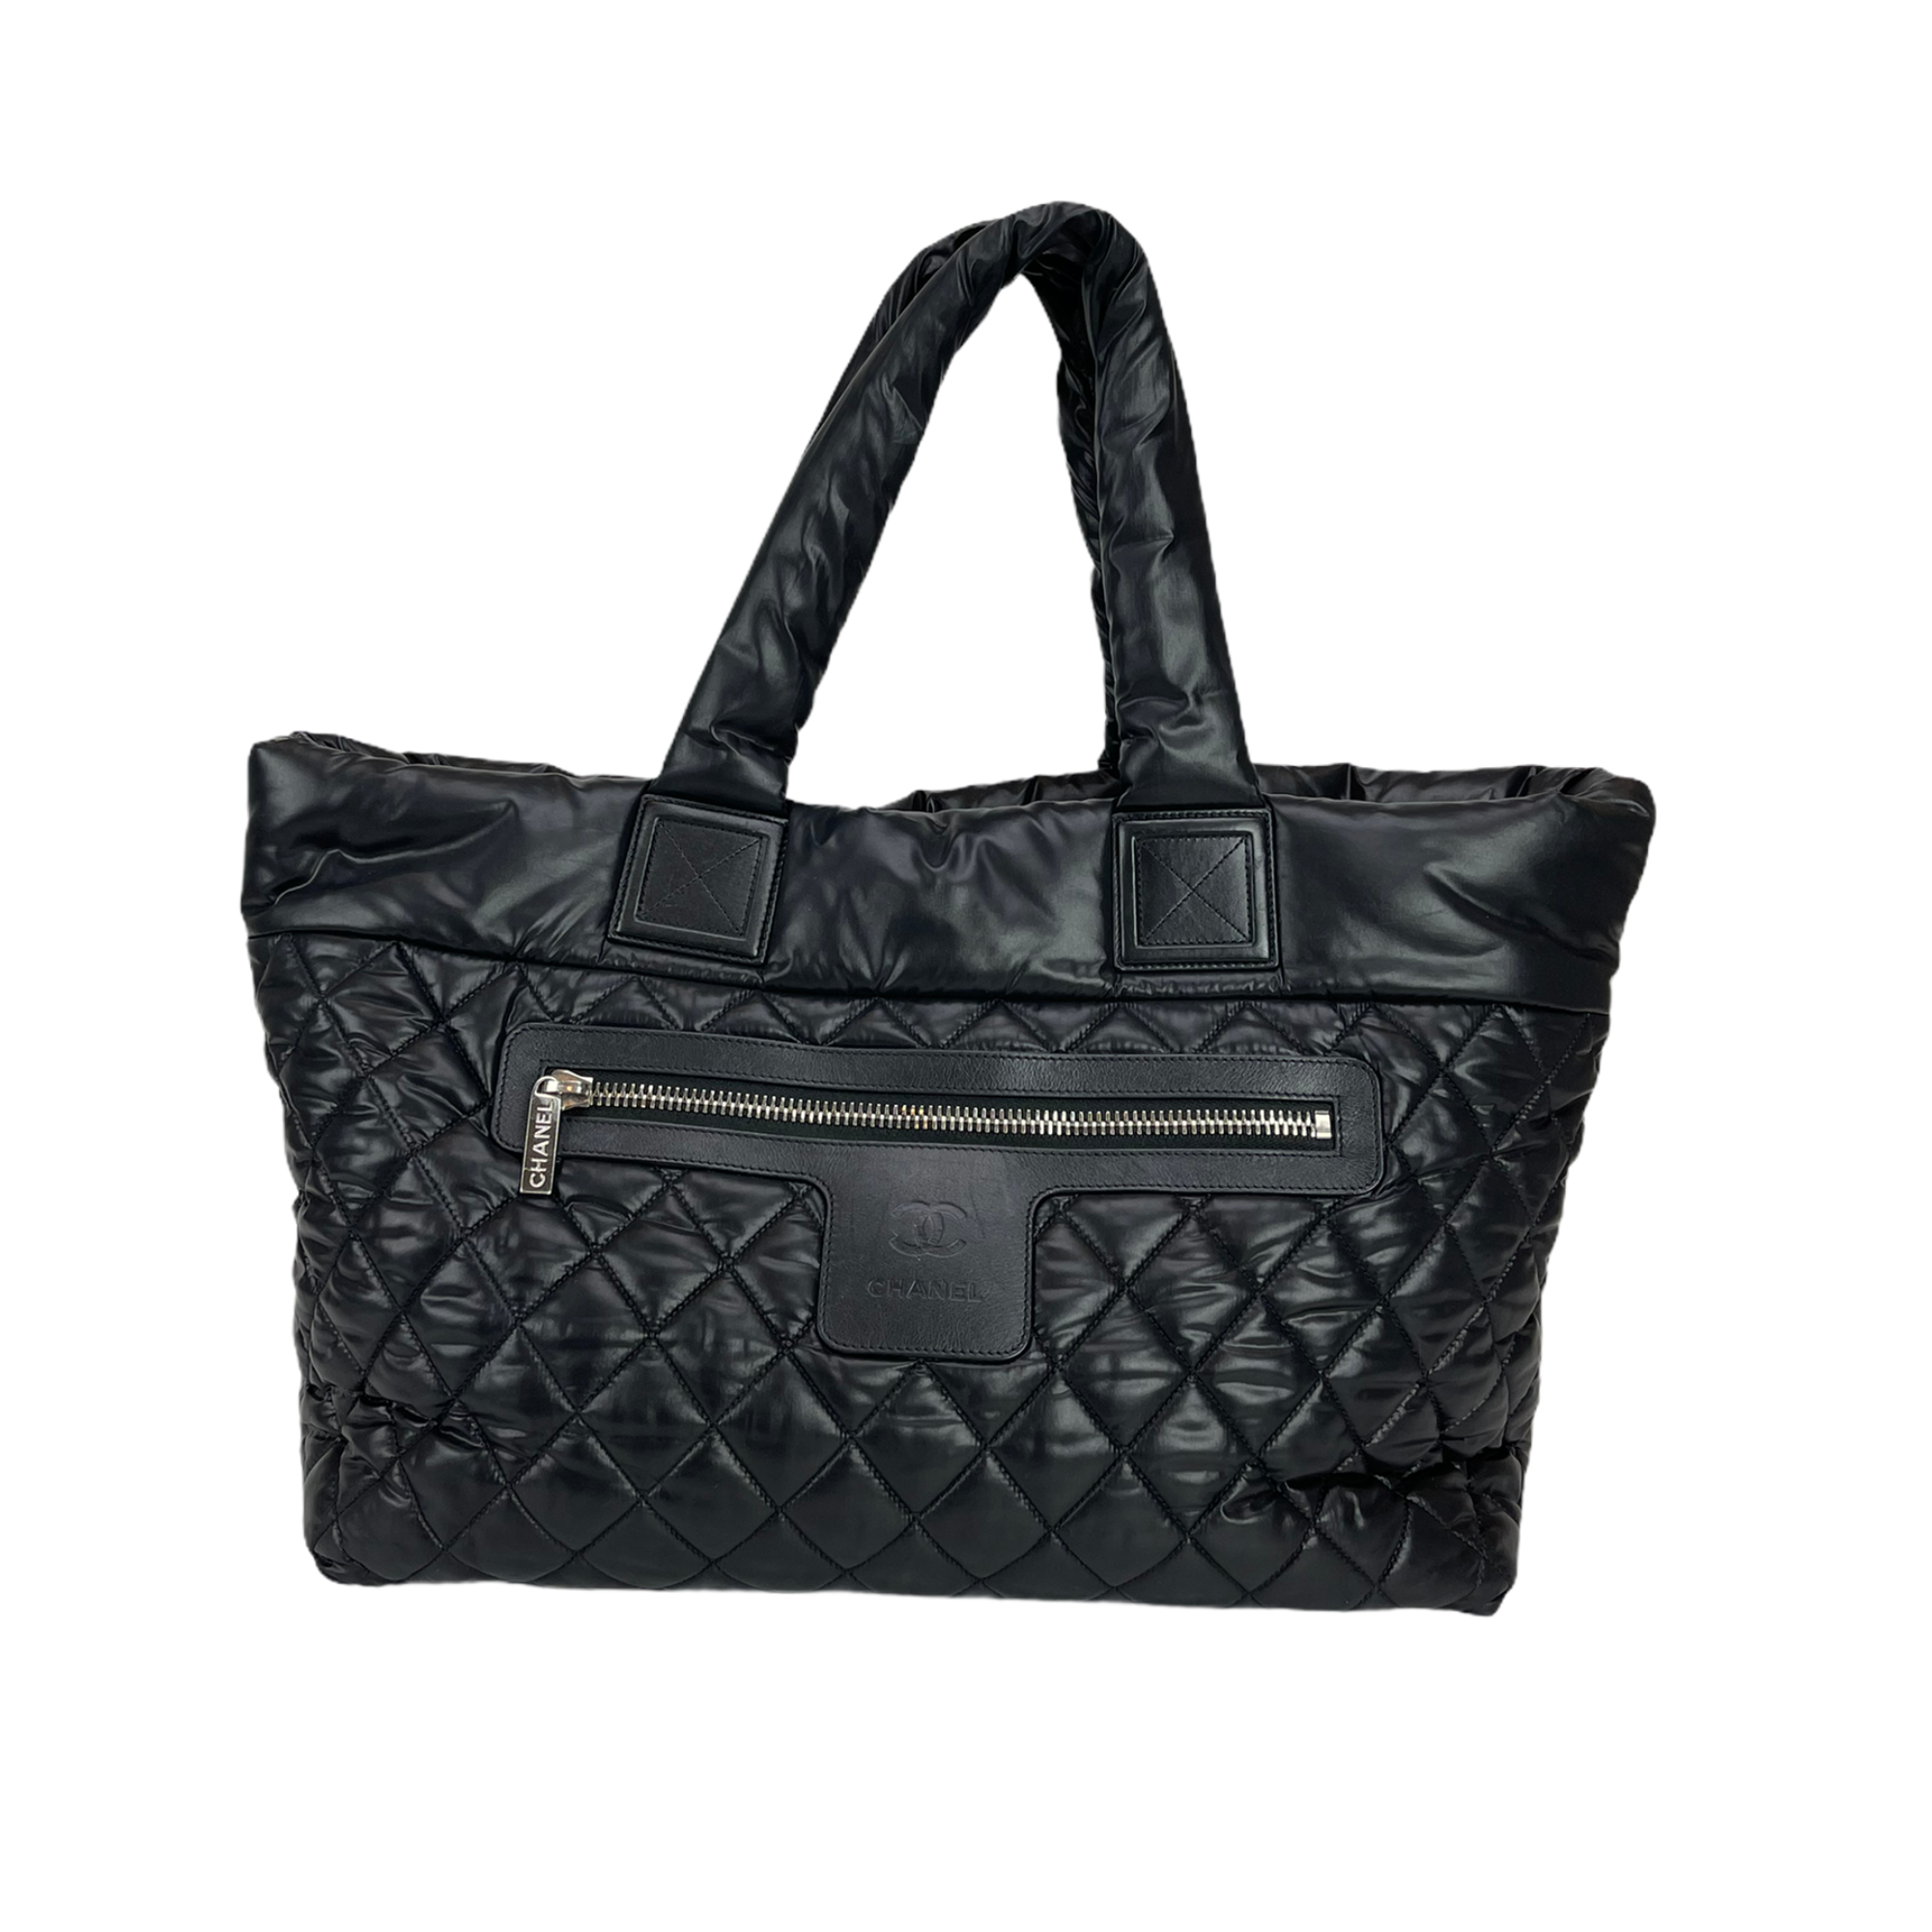 Cocoon Coco Large Nylon Tote in Black with SHW | Bag Religion